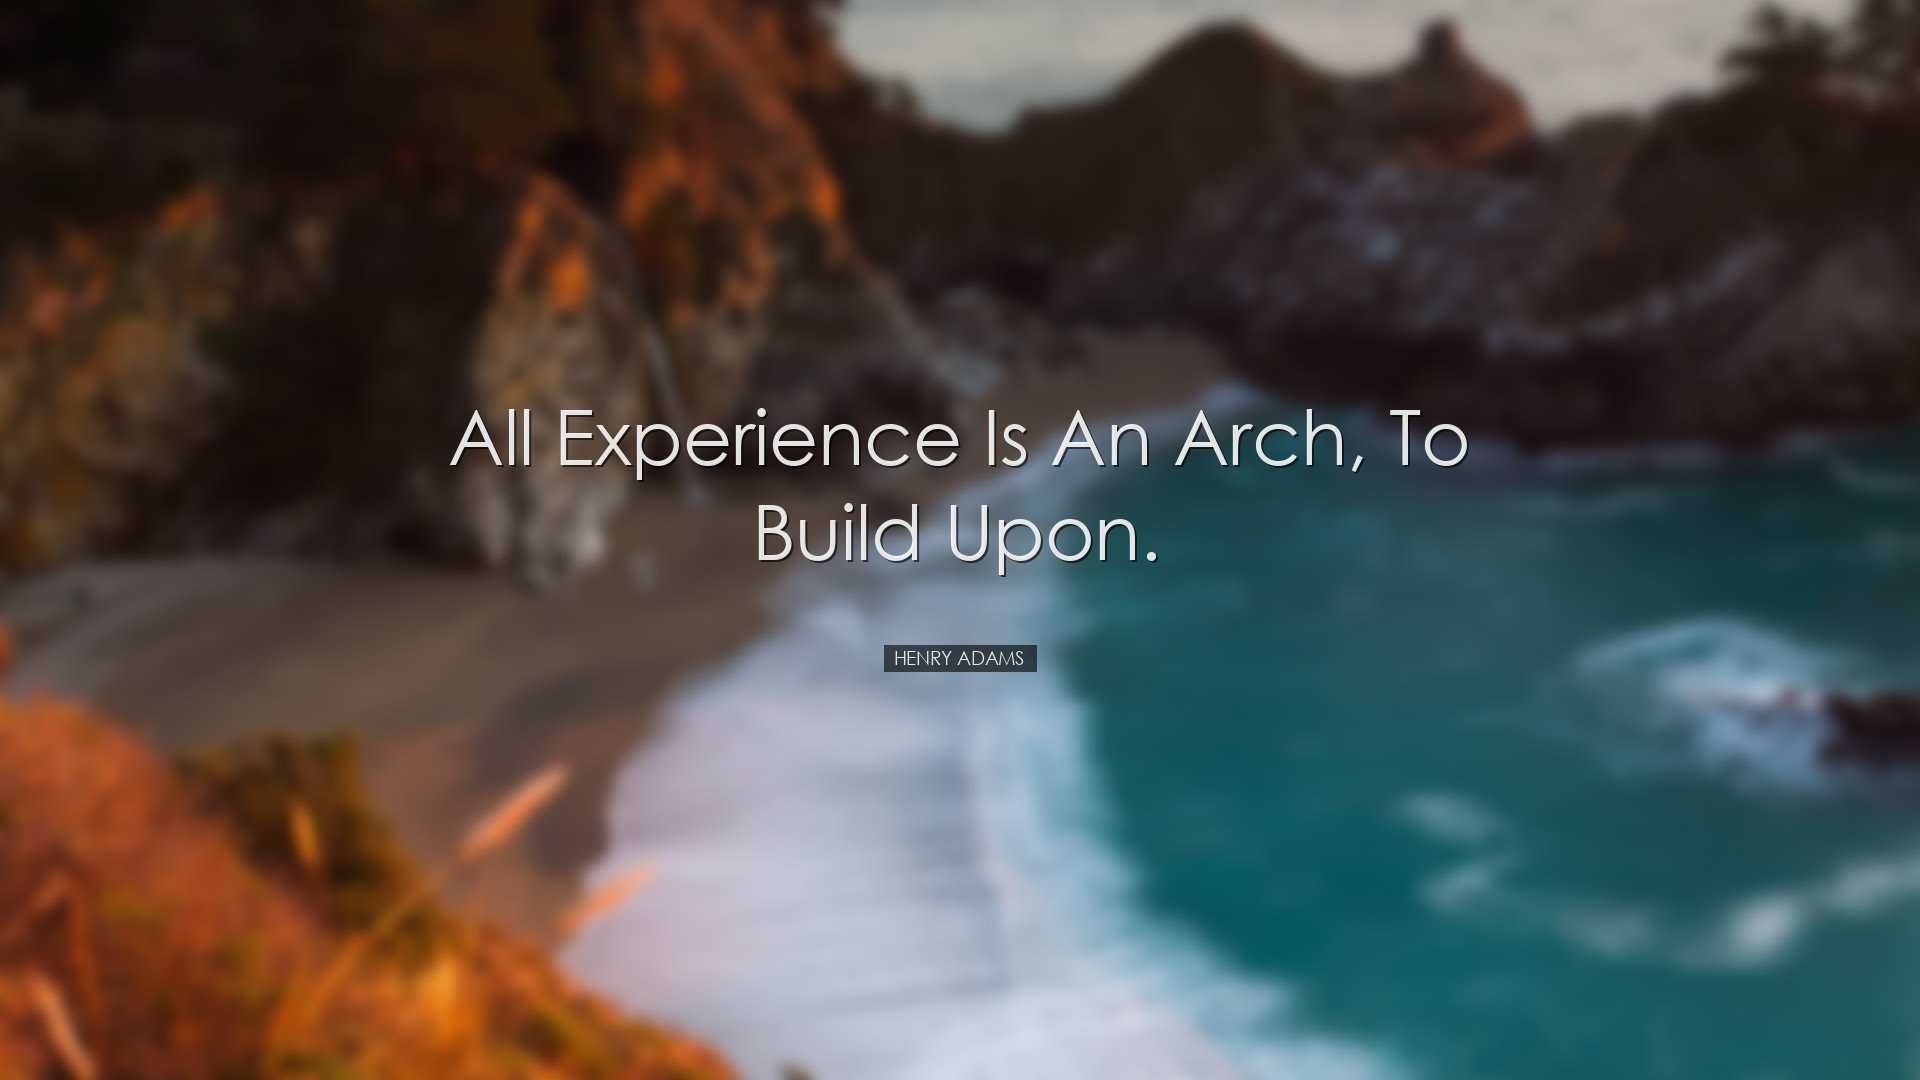 All experience is an arch, to build upon. - Henry Adams